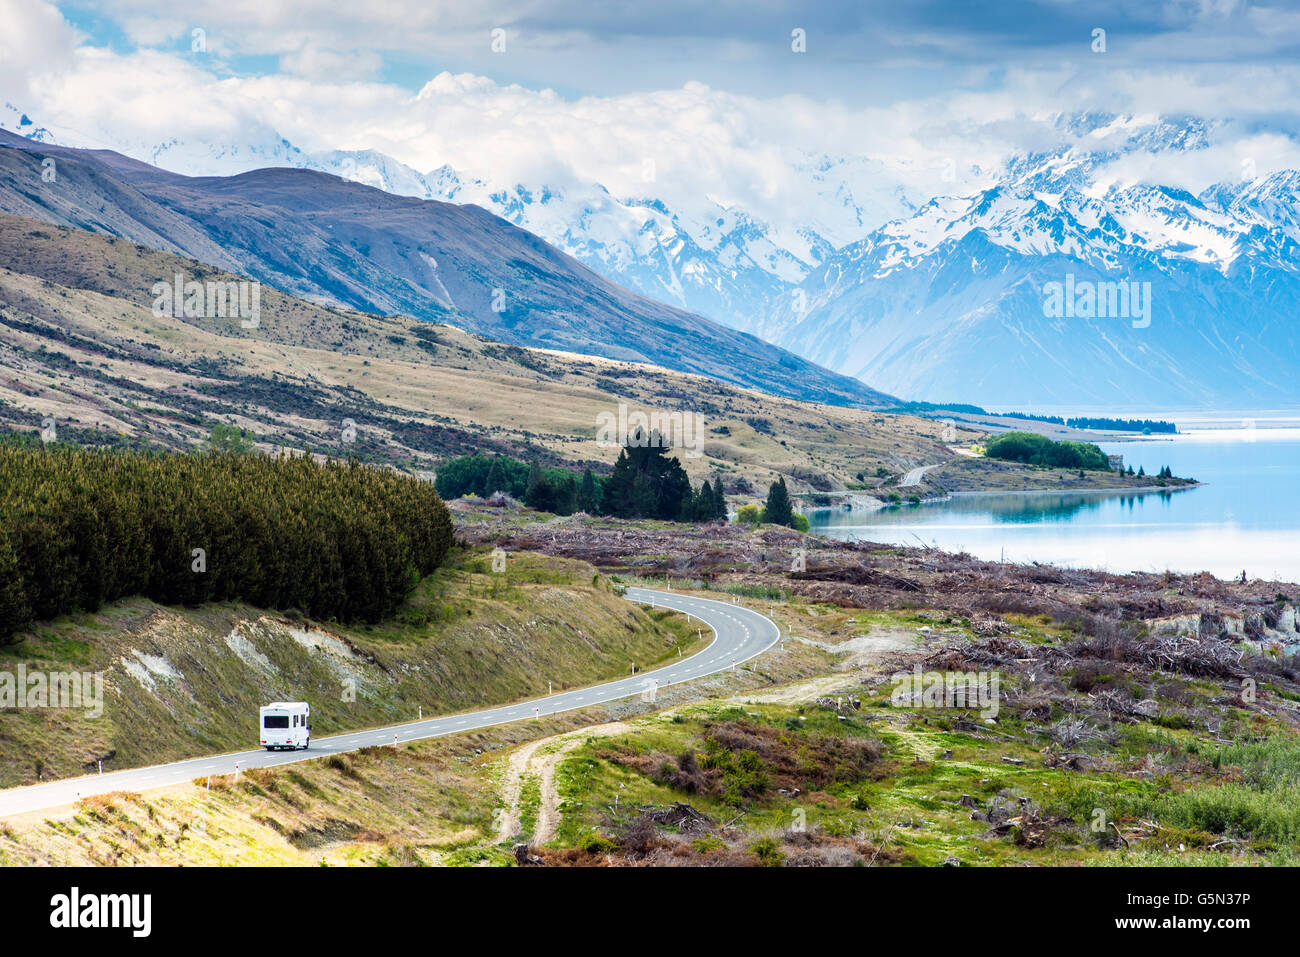 RV driving near mountains and lake in remote landscape Stock Photo